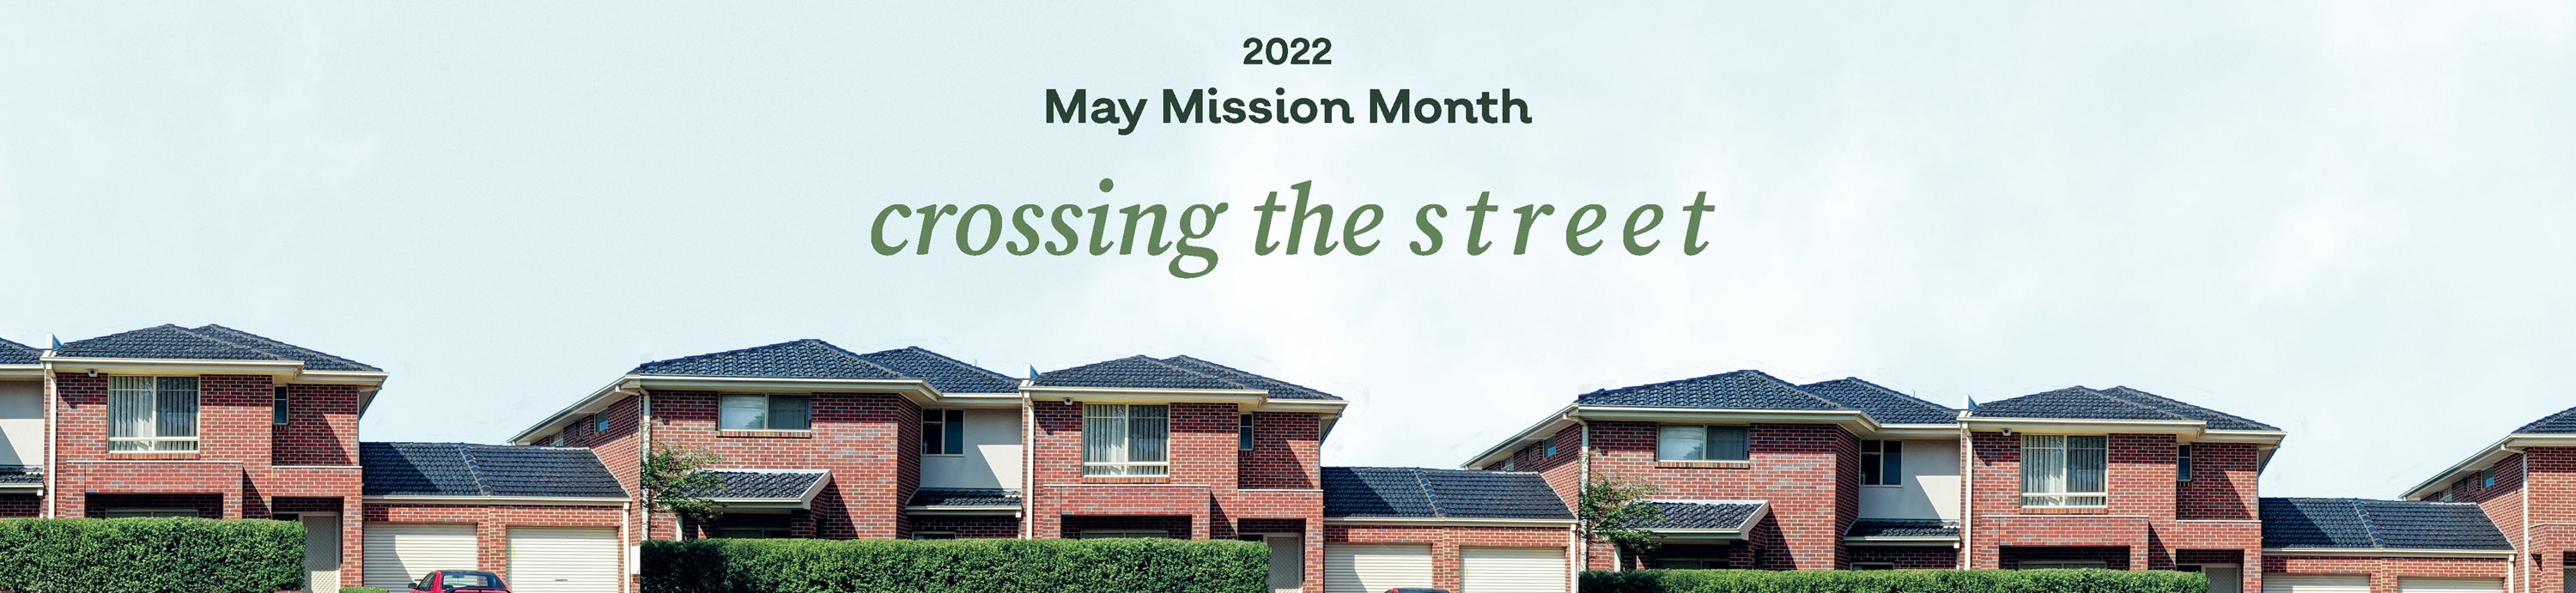 May Mission Month 2022